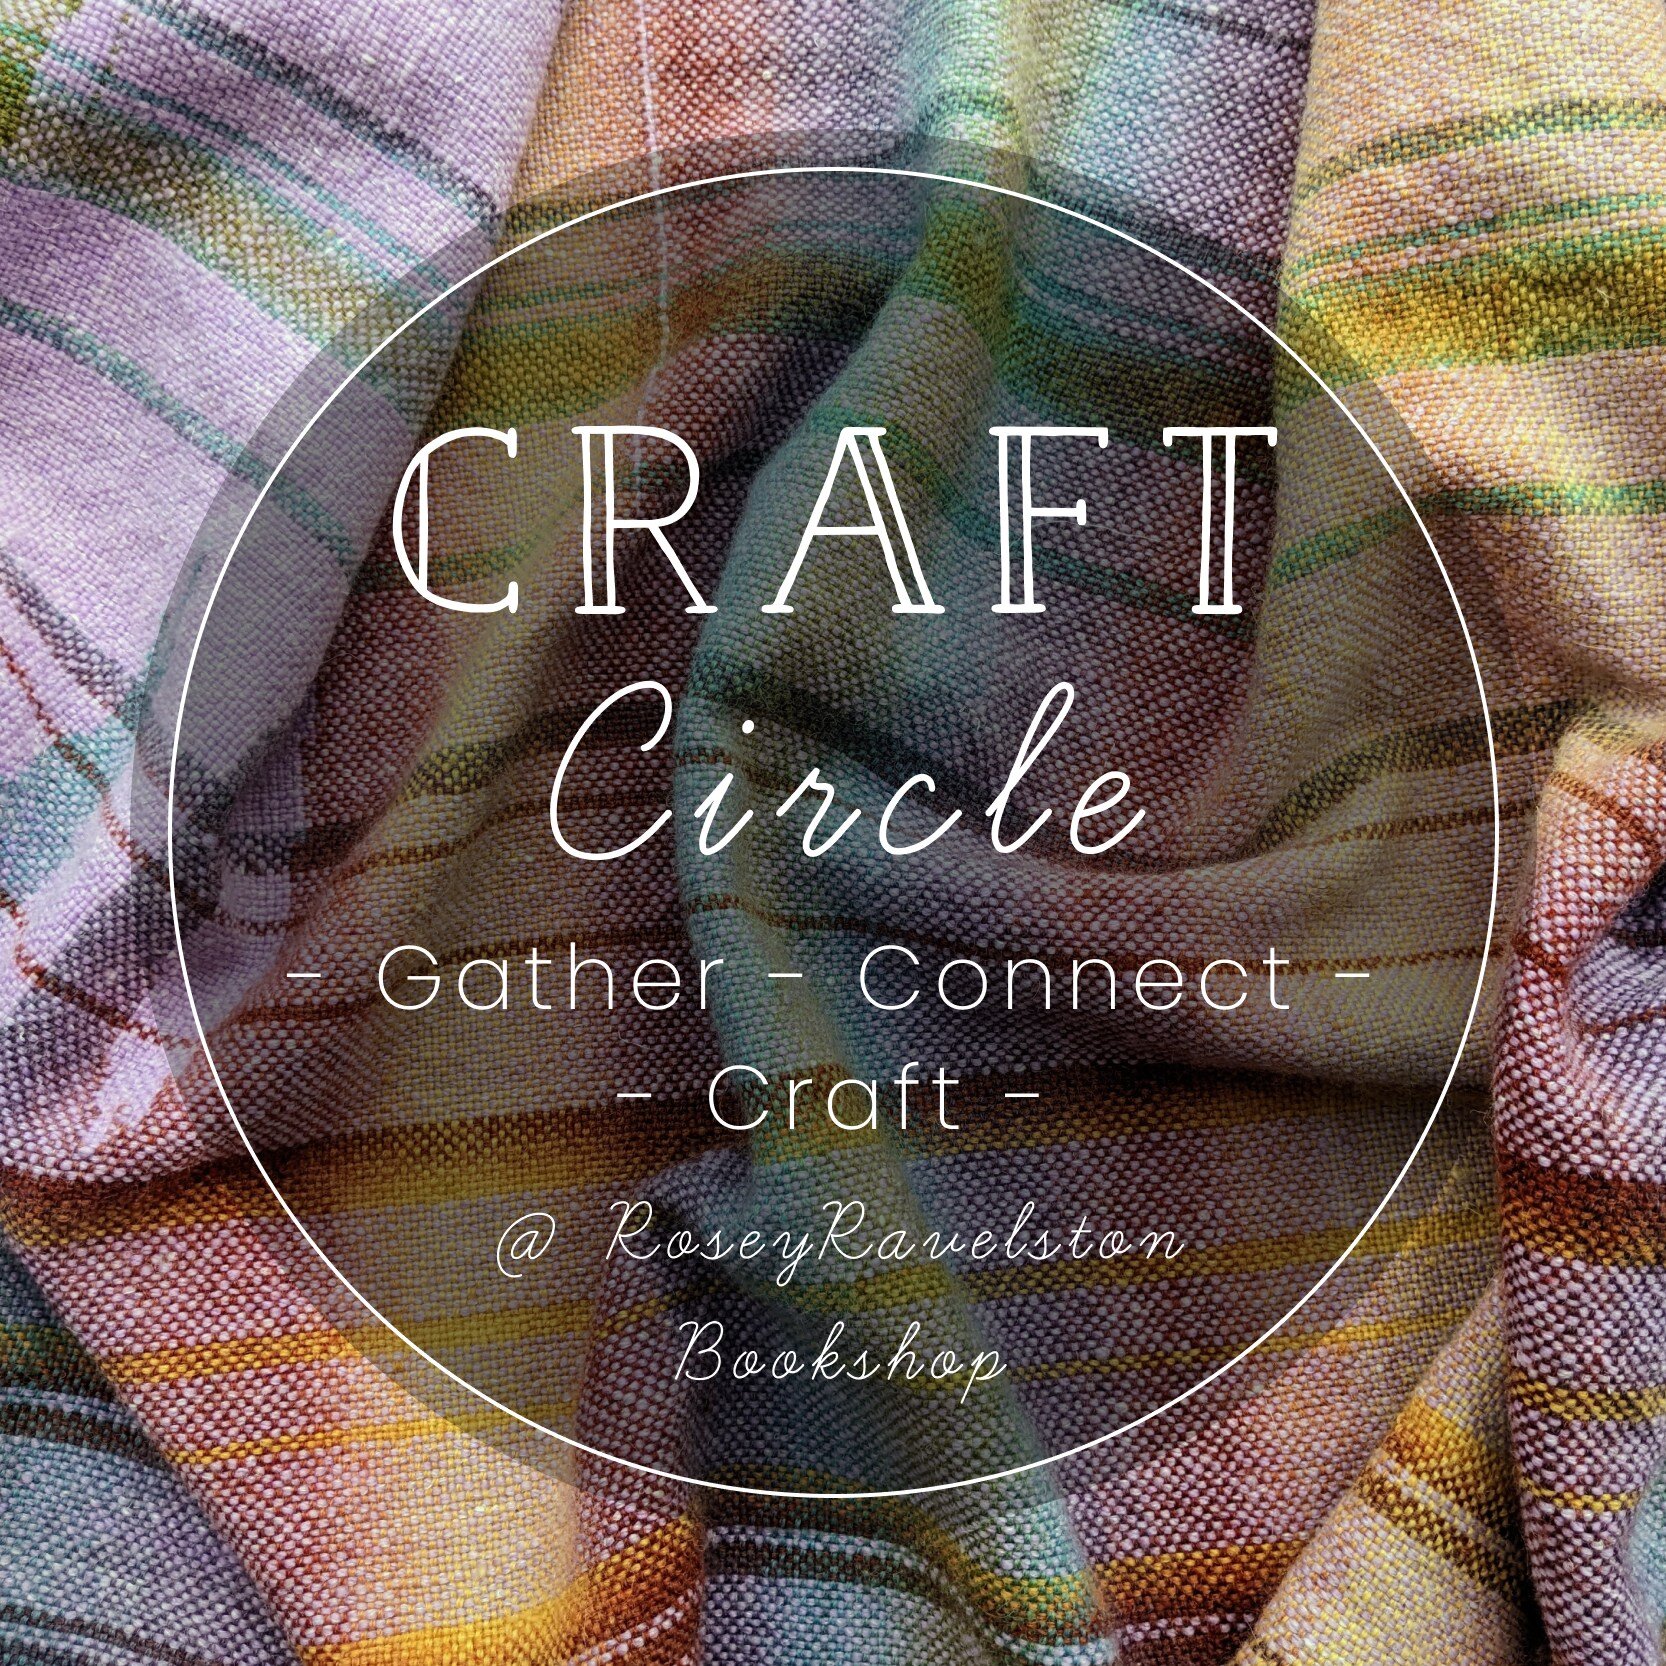 What are you doing tomorrow evening? Come along to Lyttleton's Craft Circle - 6-9 pm at @roseyravelstonbooks. Bring a project and craft in company. Free, welcoming and inclusive.

www.lyttletonstores.com.au/craft-circle

#lyttletonstores #workshops #